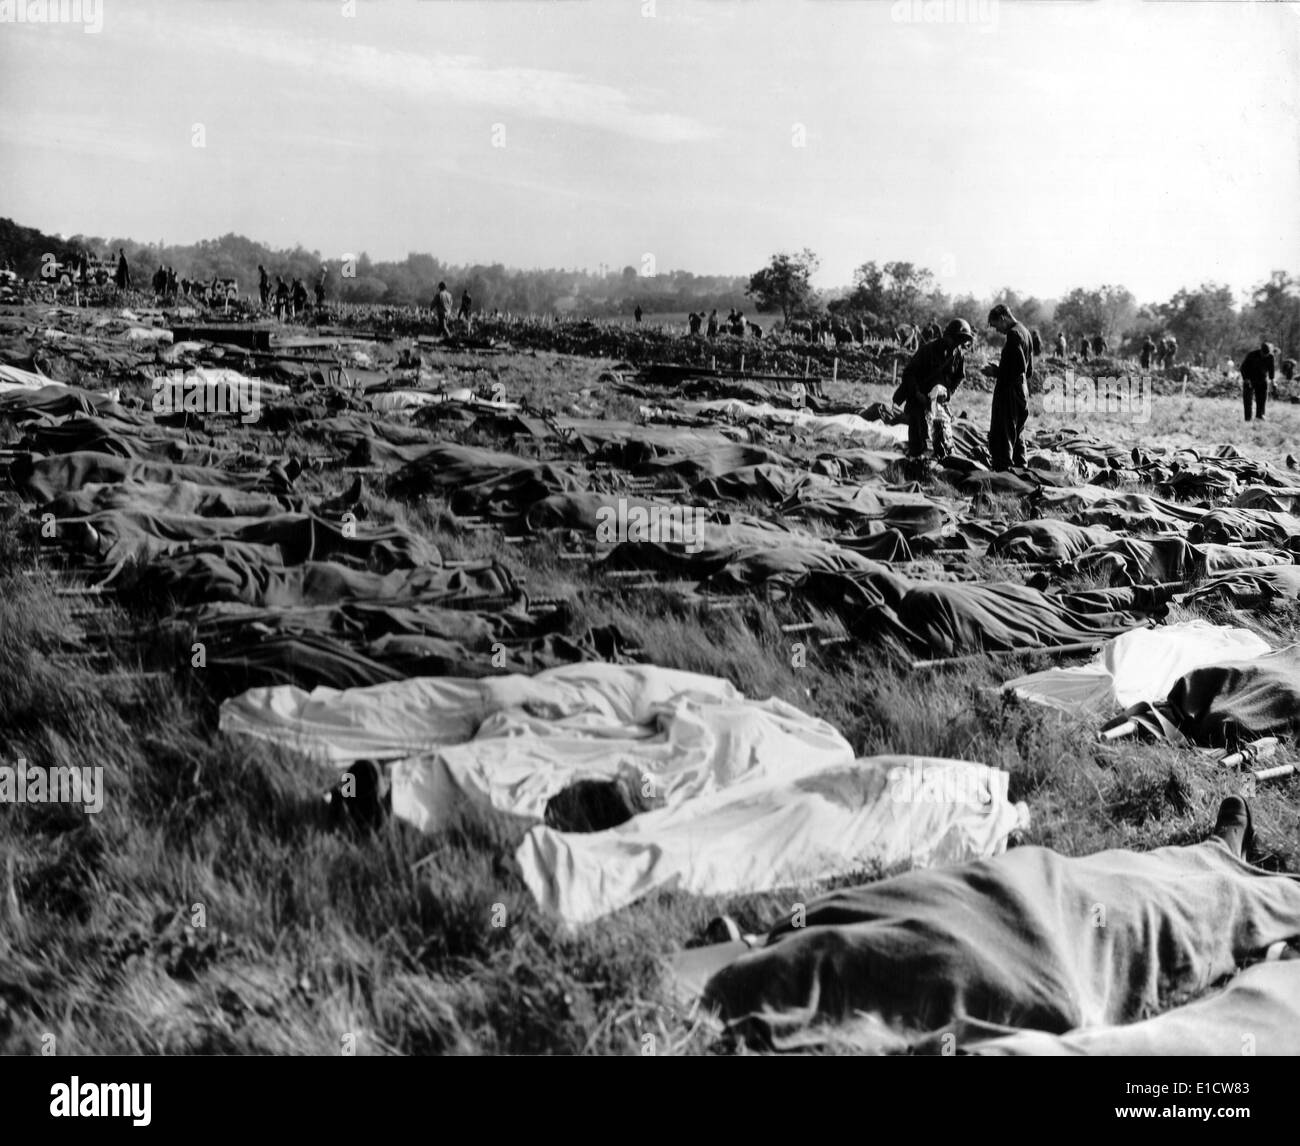 Hundreds of dead soldiers in stretchers covered with a blankets after D-Day. Killed during Normandy landings, they lie in a Stock Photo